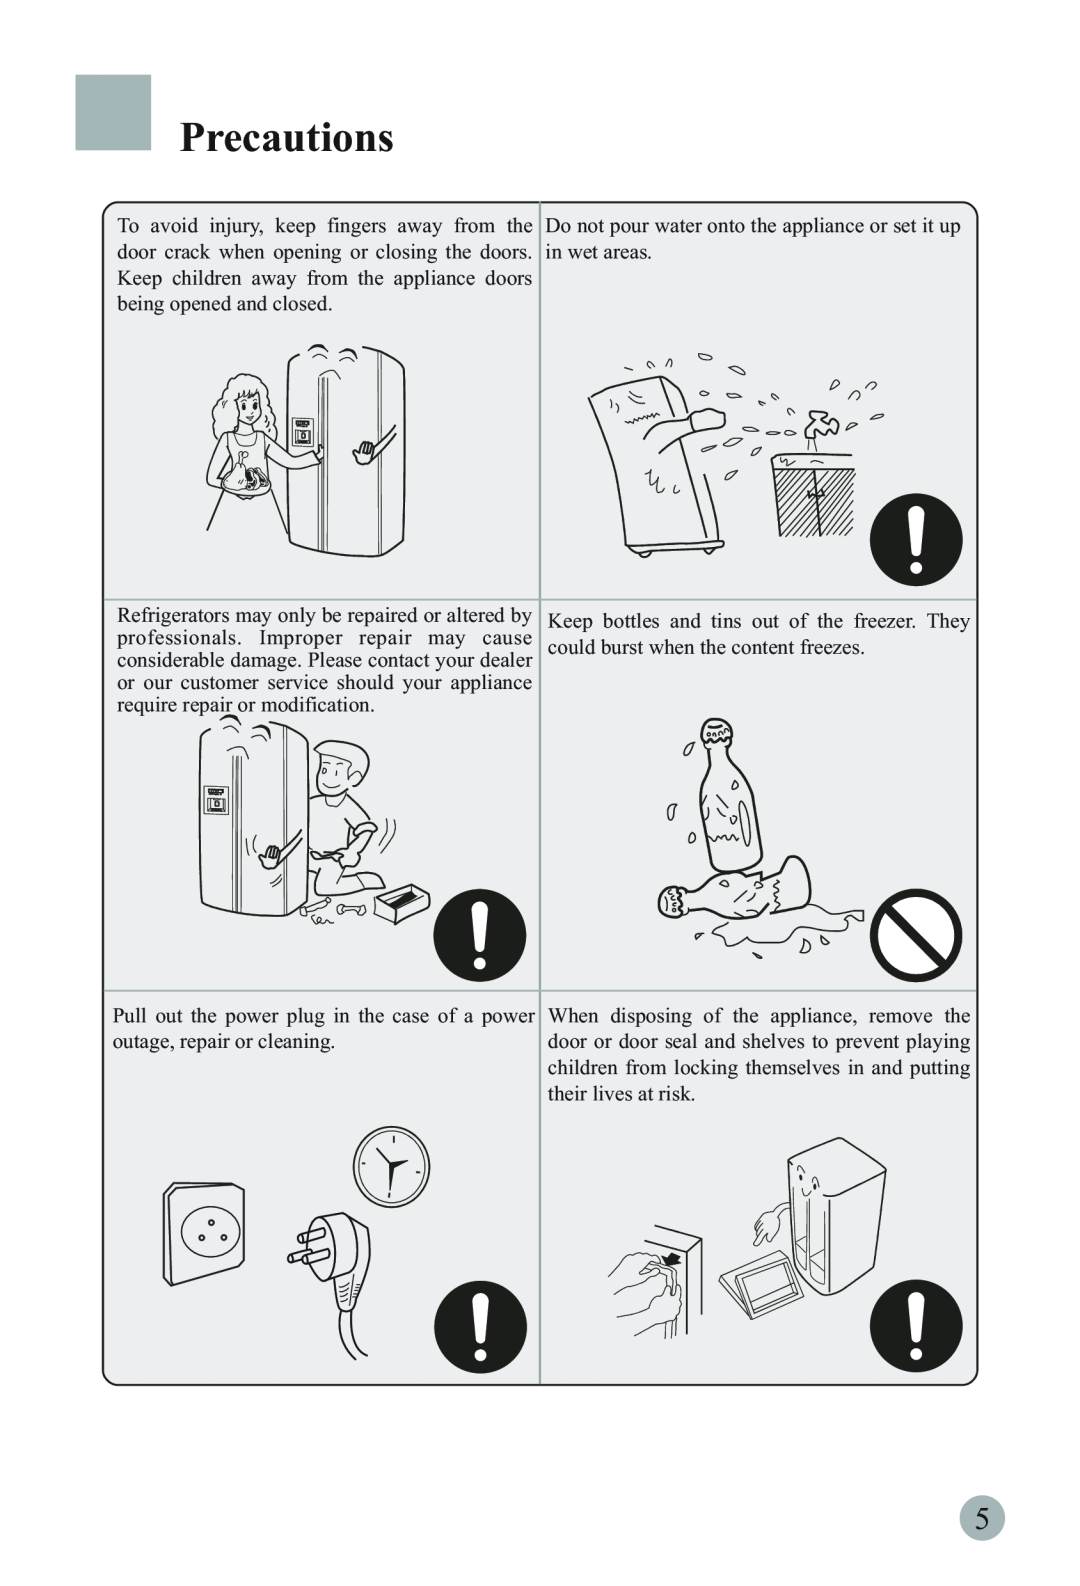 Haier HRF-663IRG manual Precautions, Keep children away from the appliance doors being opened and closed 